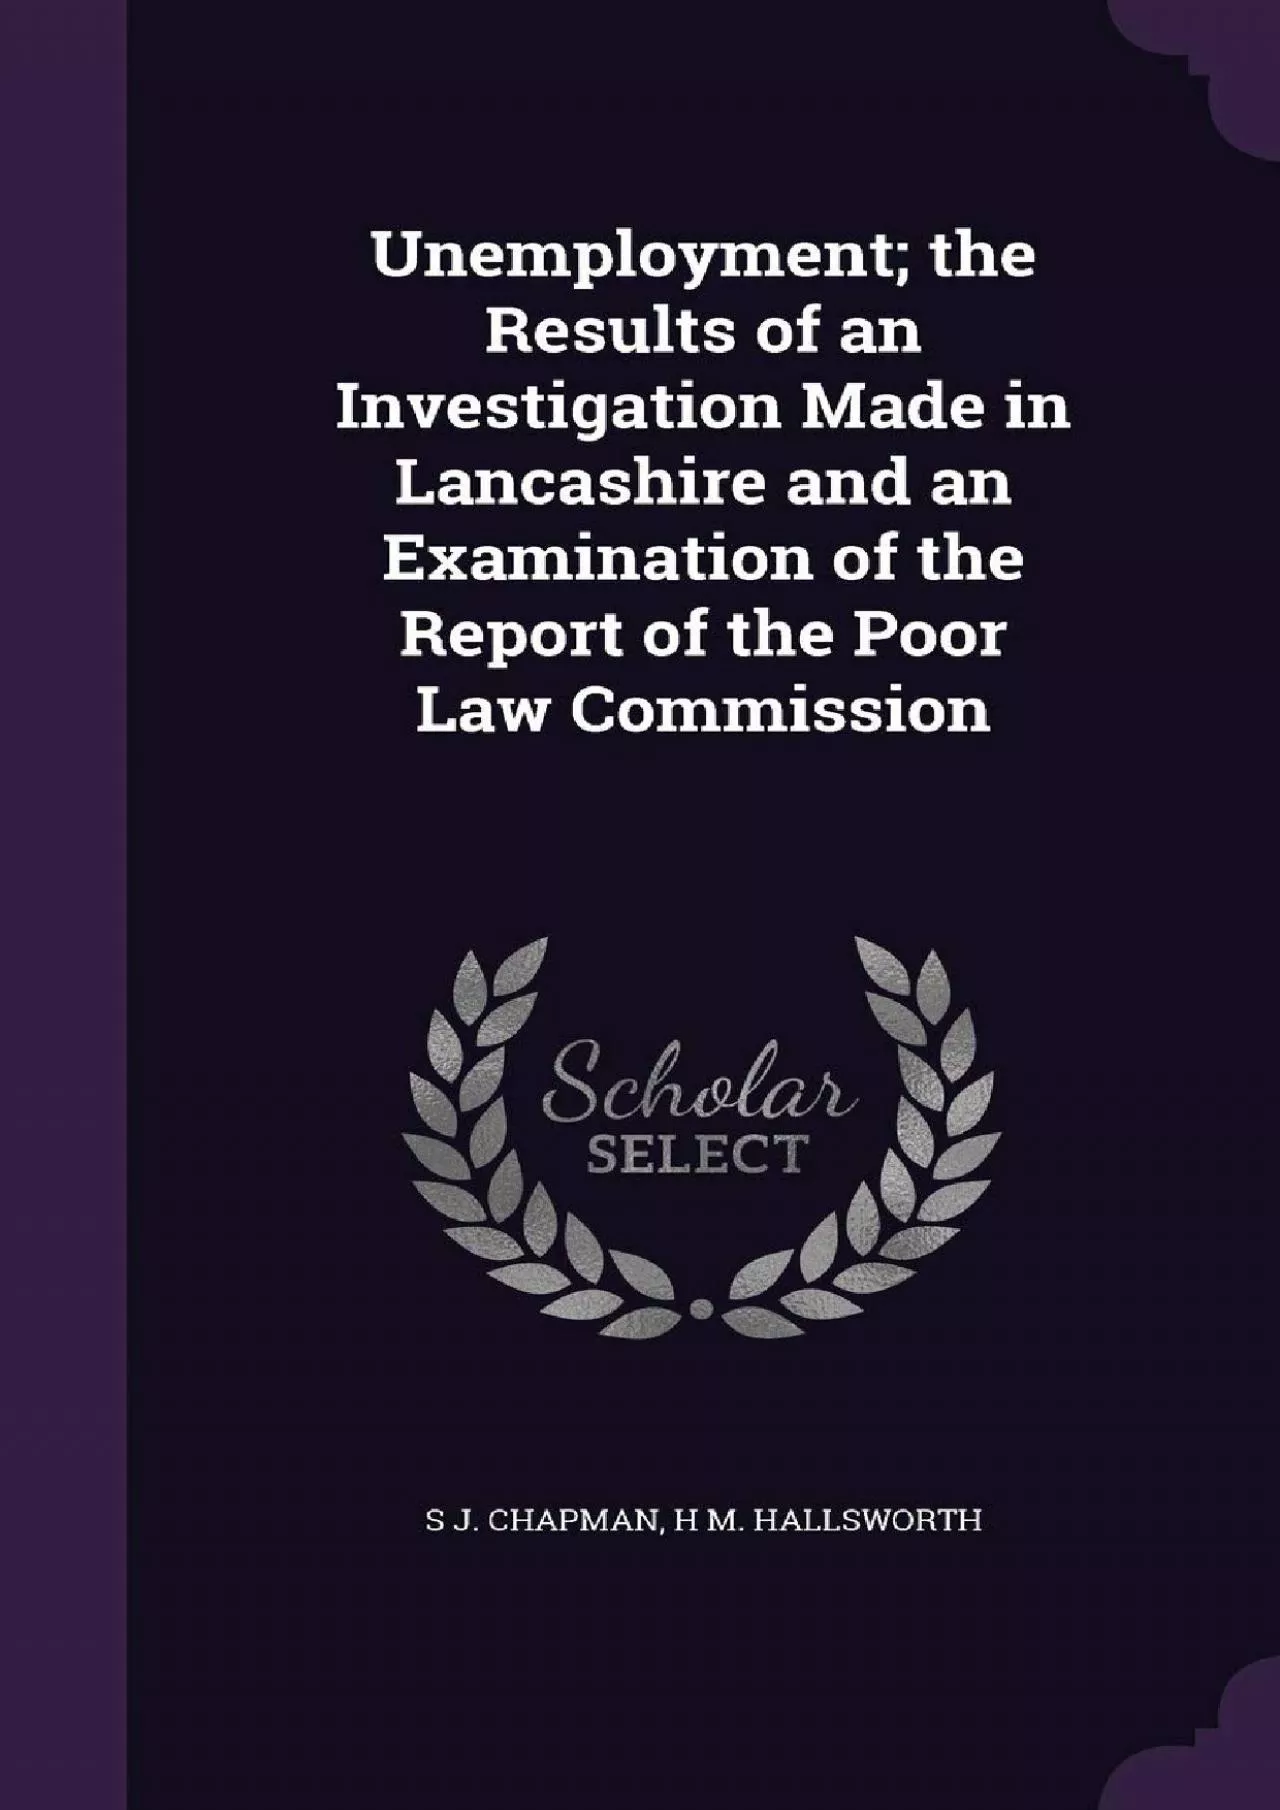 (BOOK)-Unemployment the Results of an Investigation Made in Lancashire and an Examination